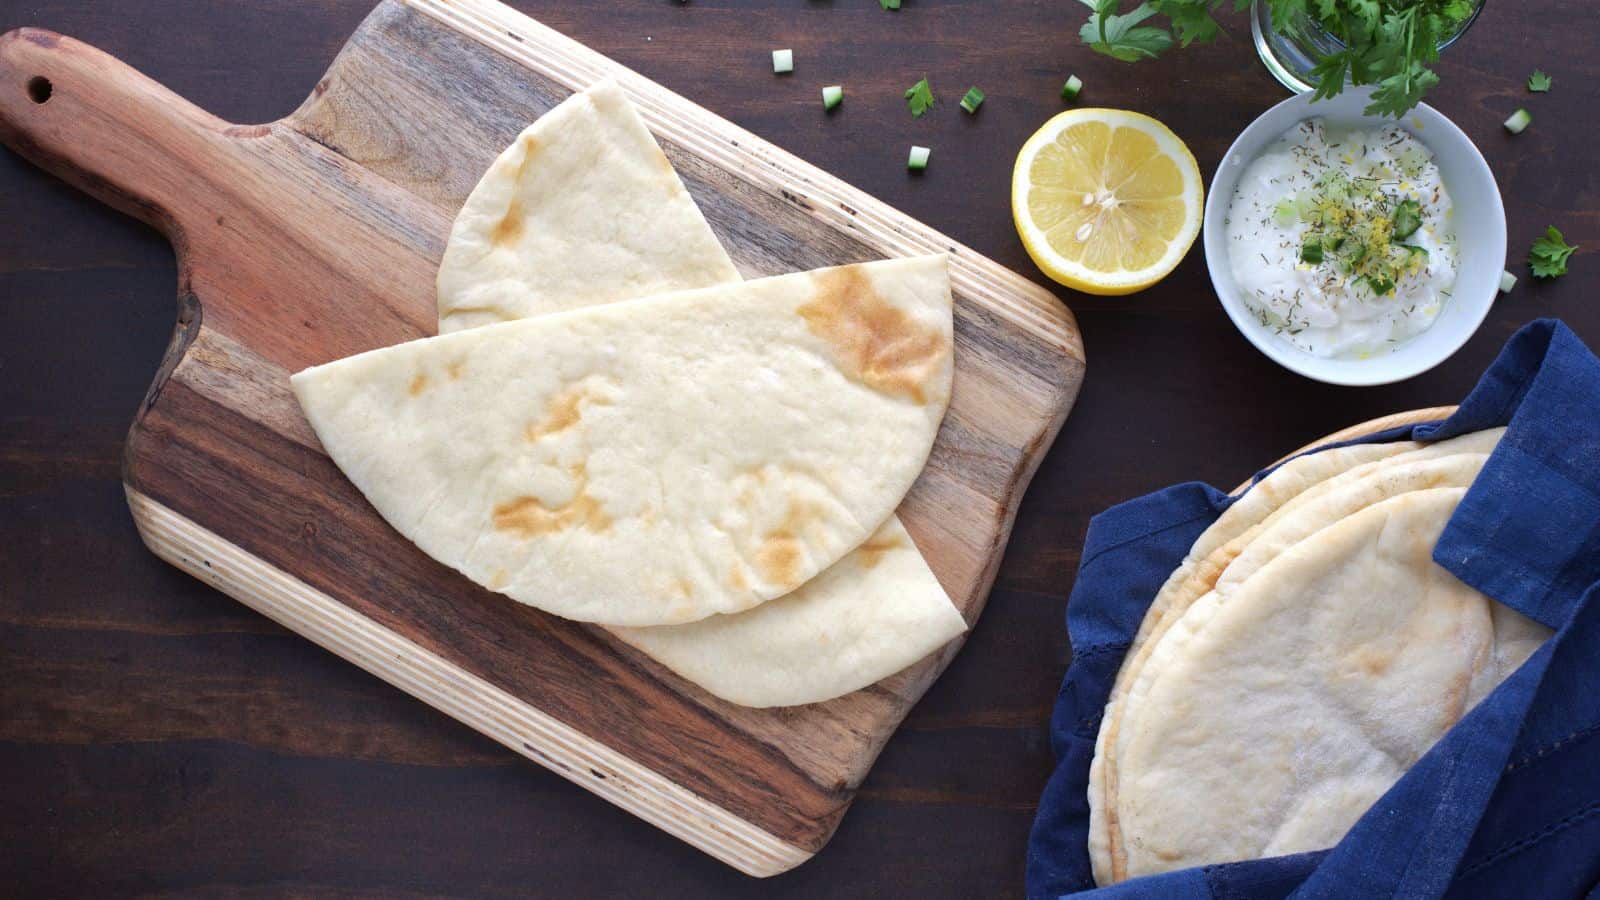 A wooden cutting board with pita bread and lemon wedges.